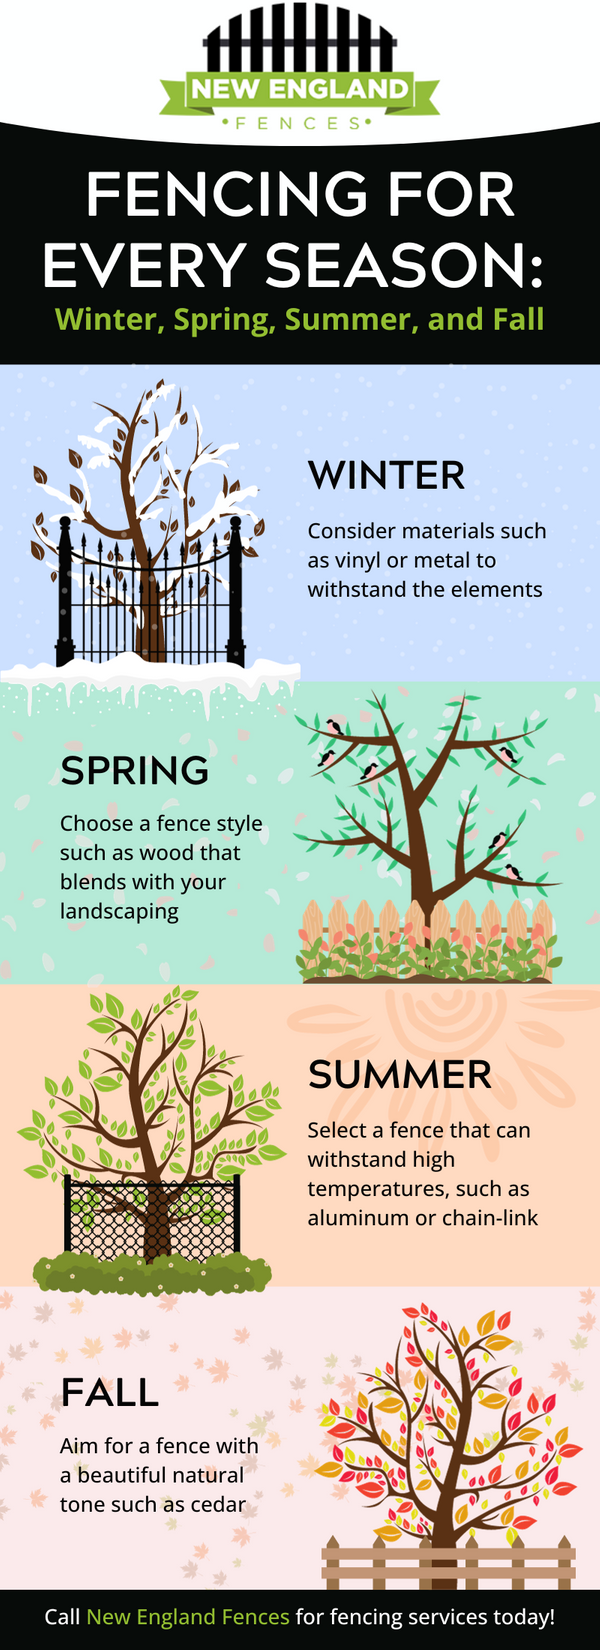 M30708 - New England Fences Infographic Fencing for Every Season Winter, Spring, Summer, and Fall (800 x 2200 px).png